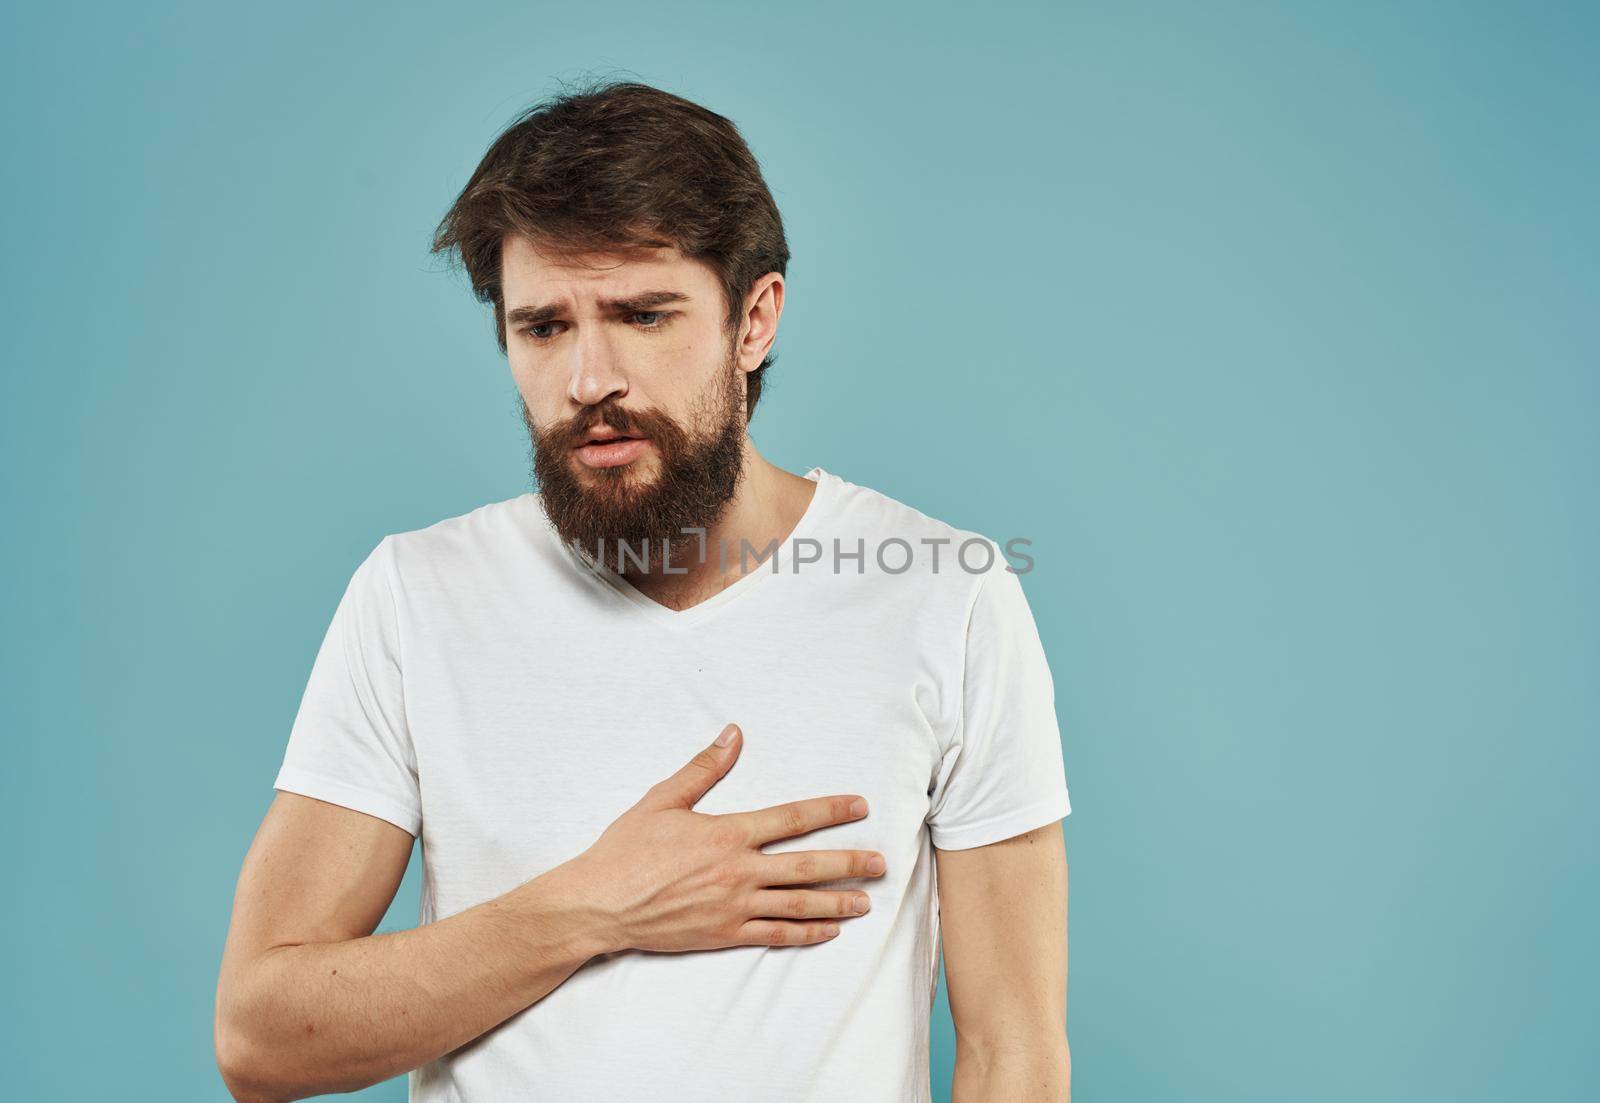 Guy in a white t-shirt on a blue background sad face and cropped view of the model. High quality photo